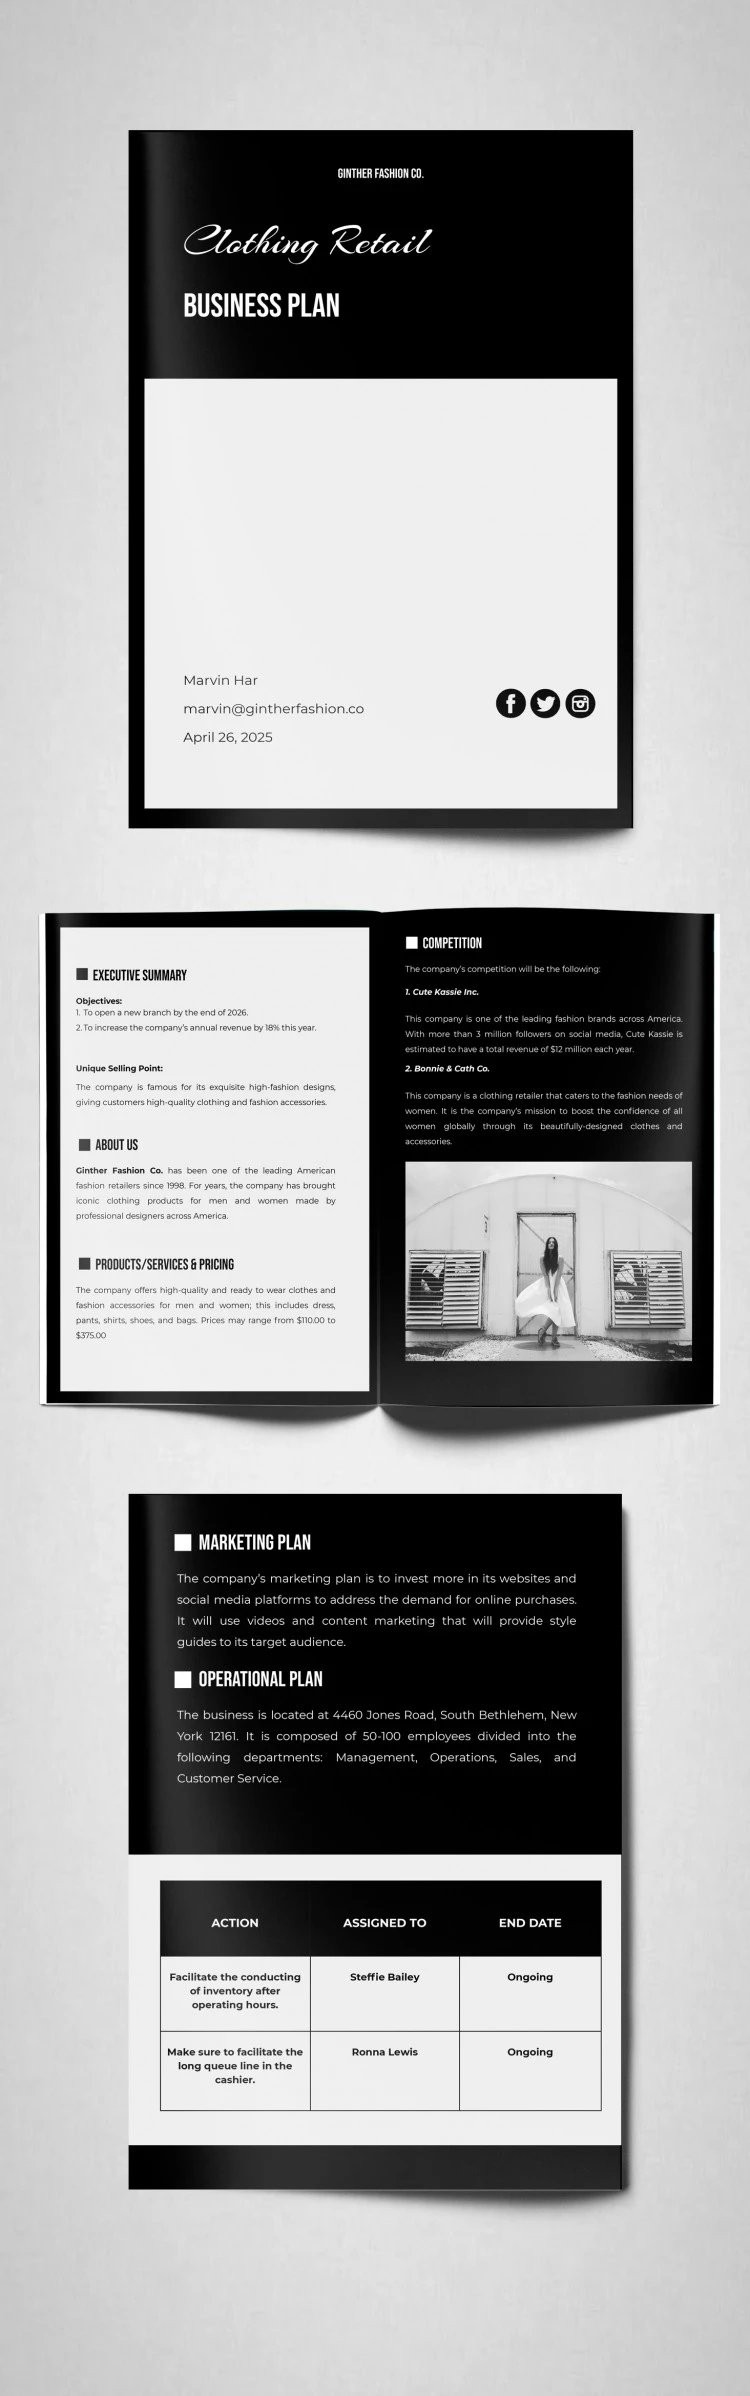 Black and White Business Plan - free Google Docs Template - 10061777